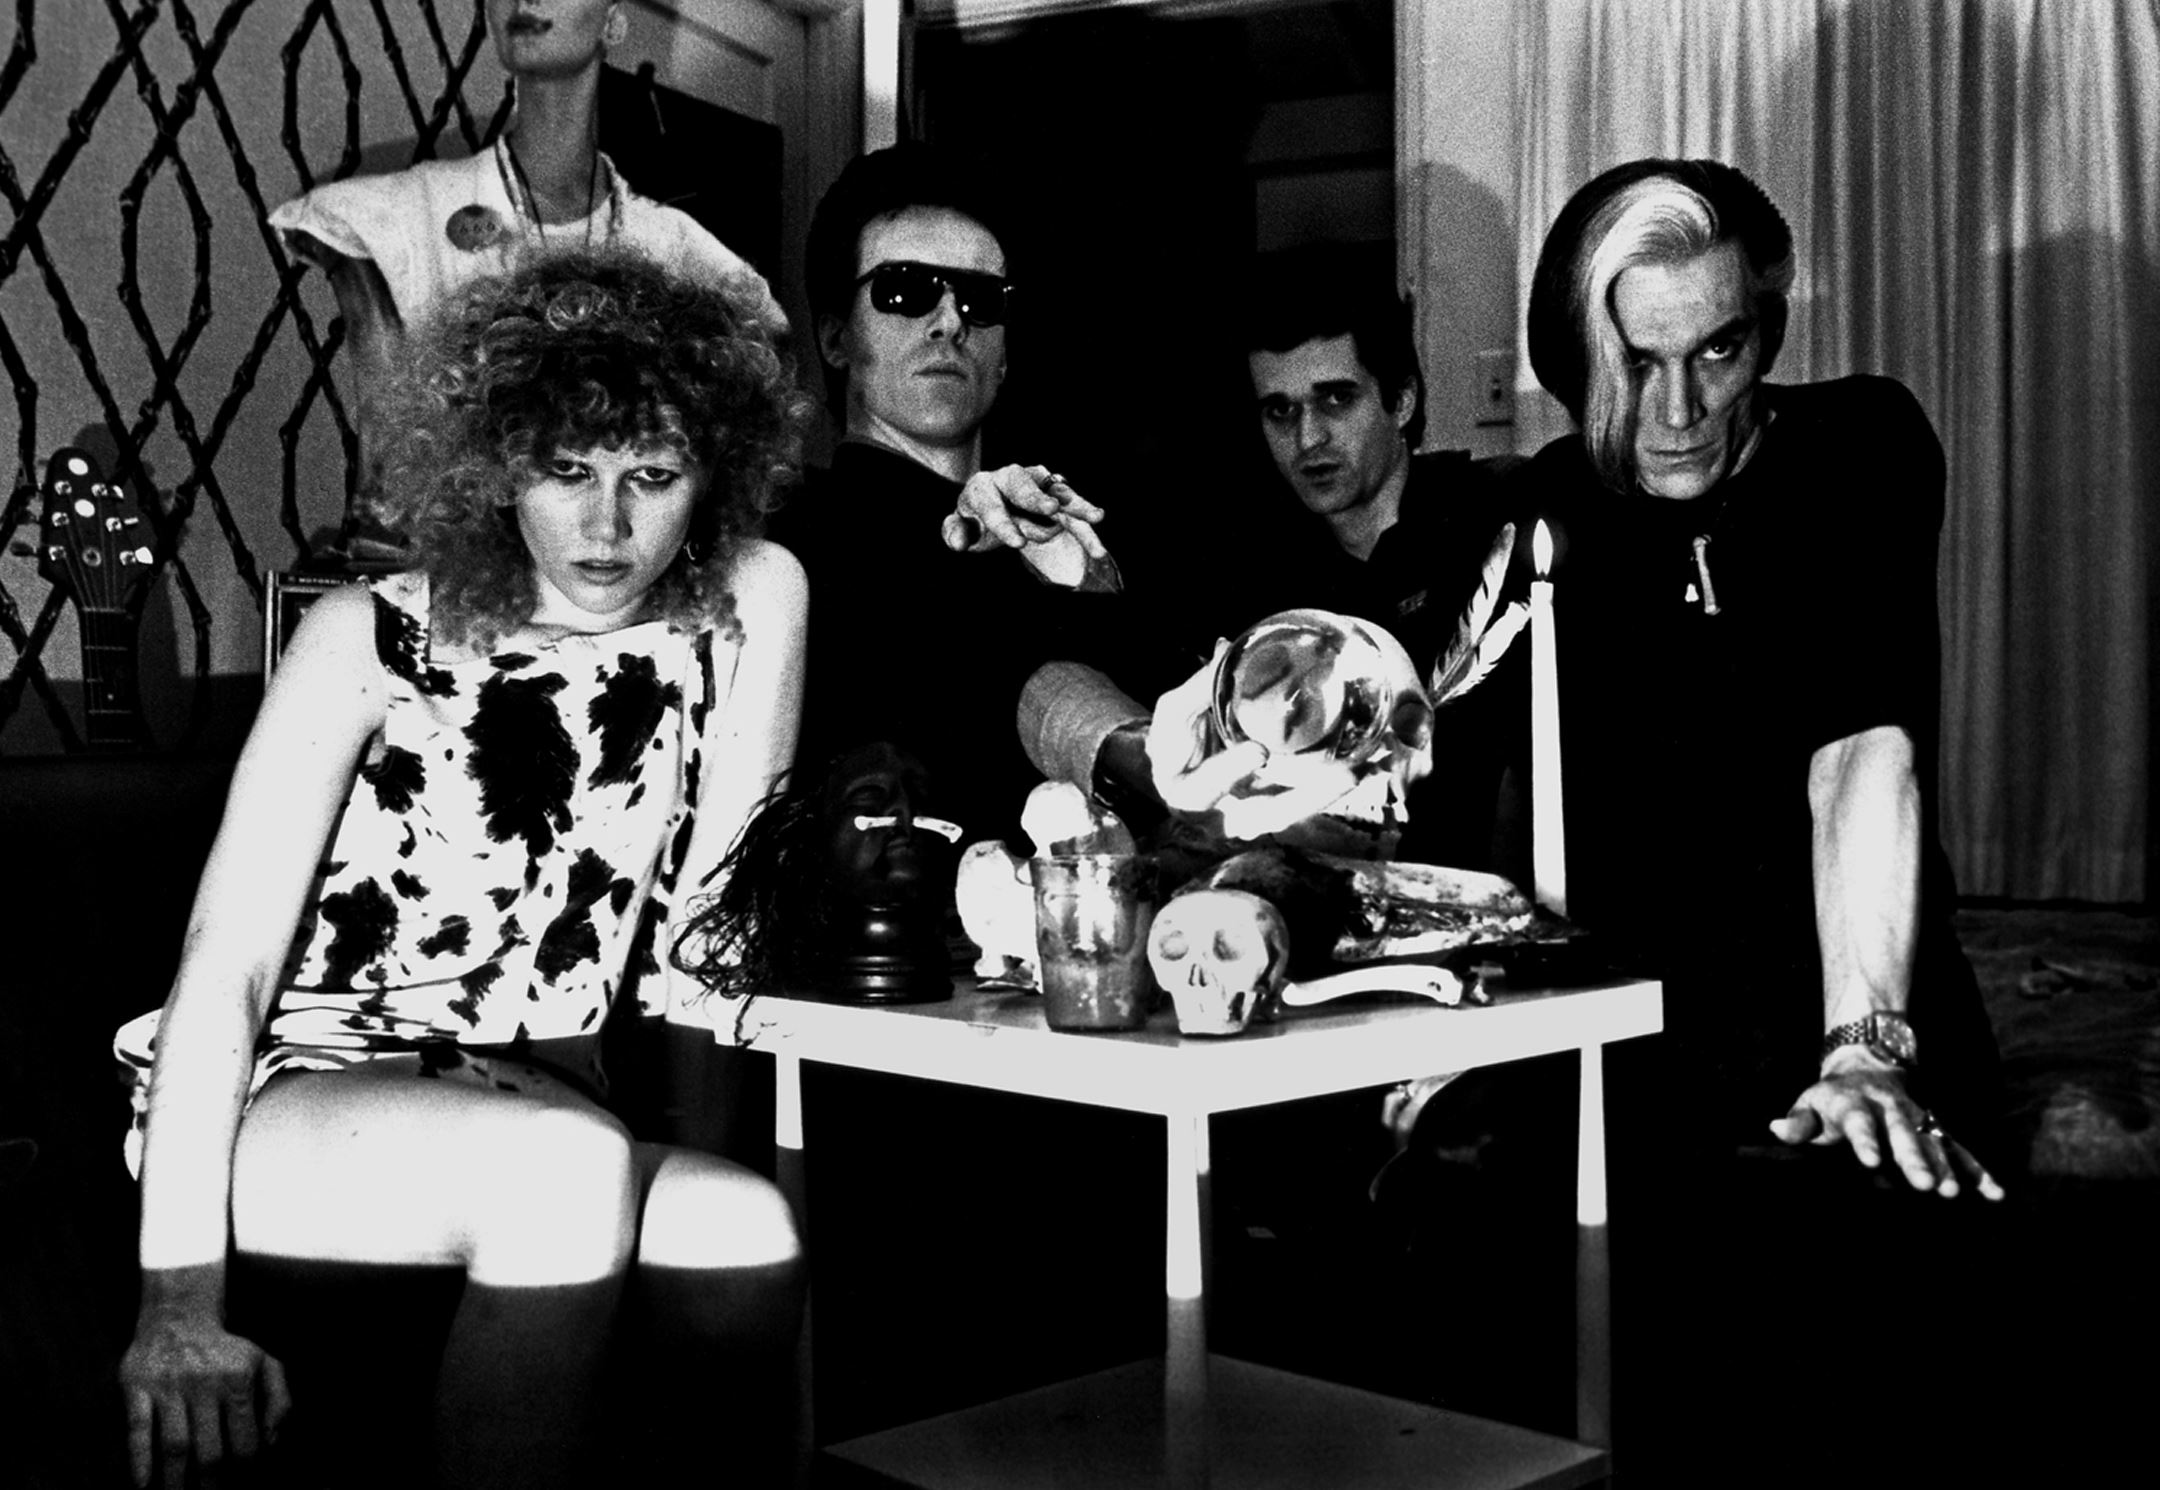 Download Latest HD Wallpaper of, Music, The Cramps